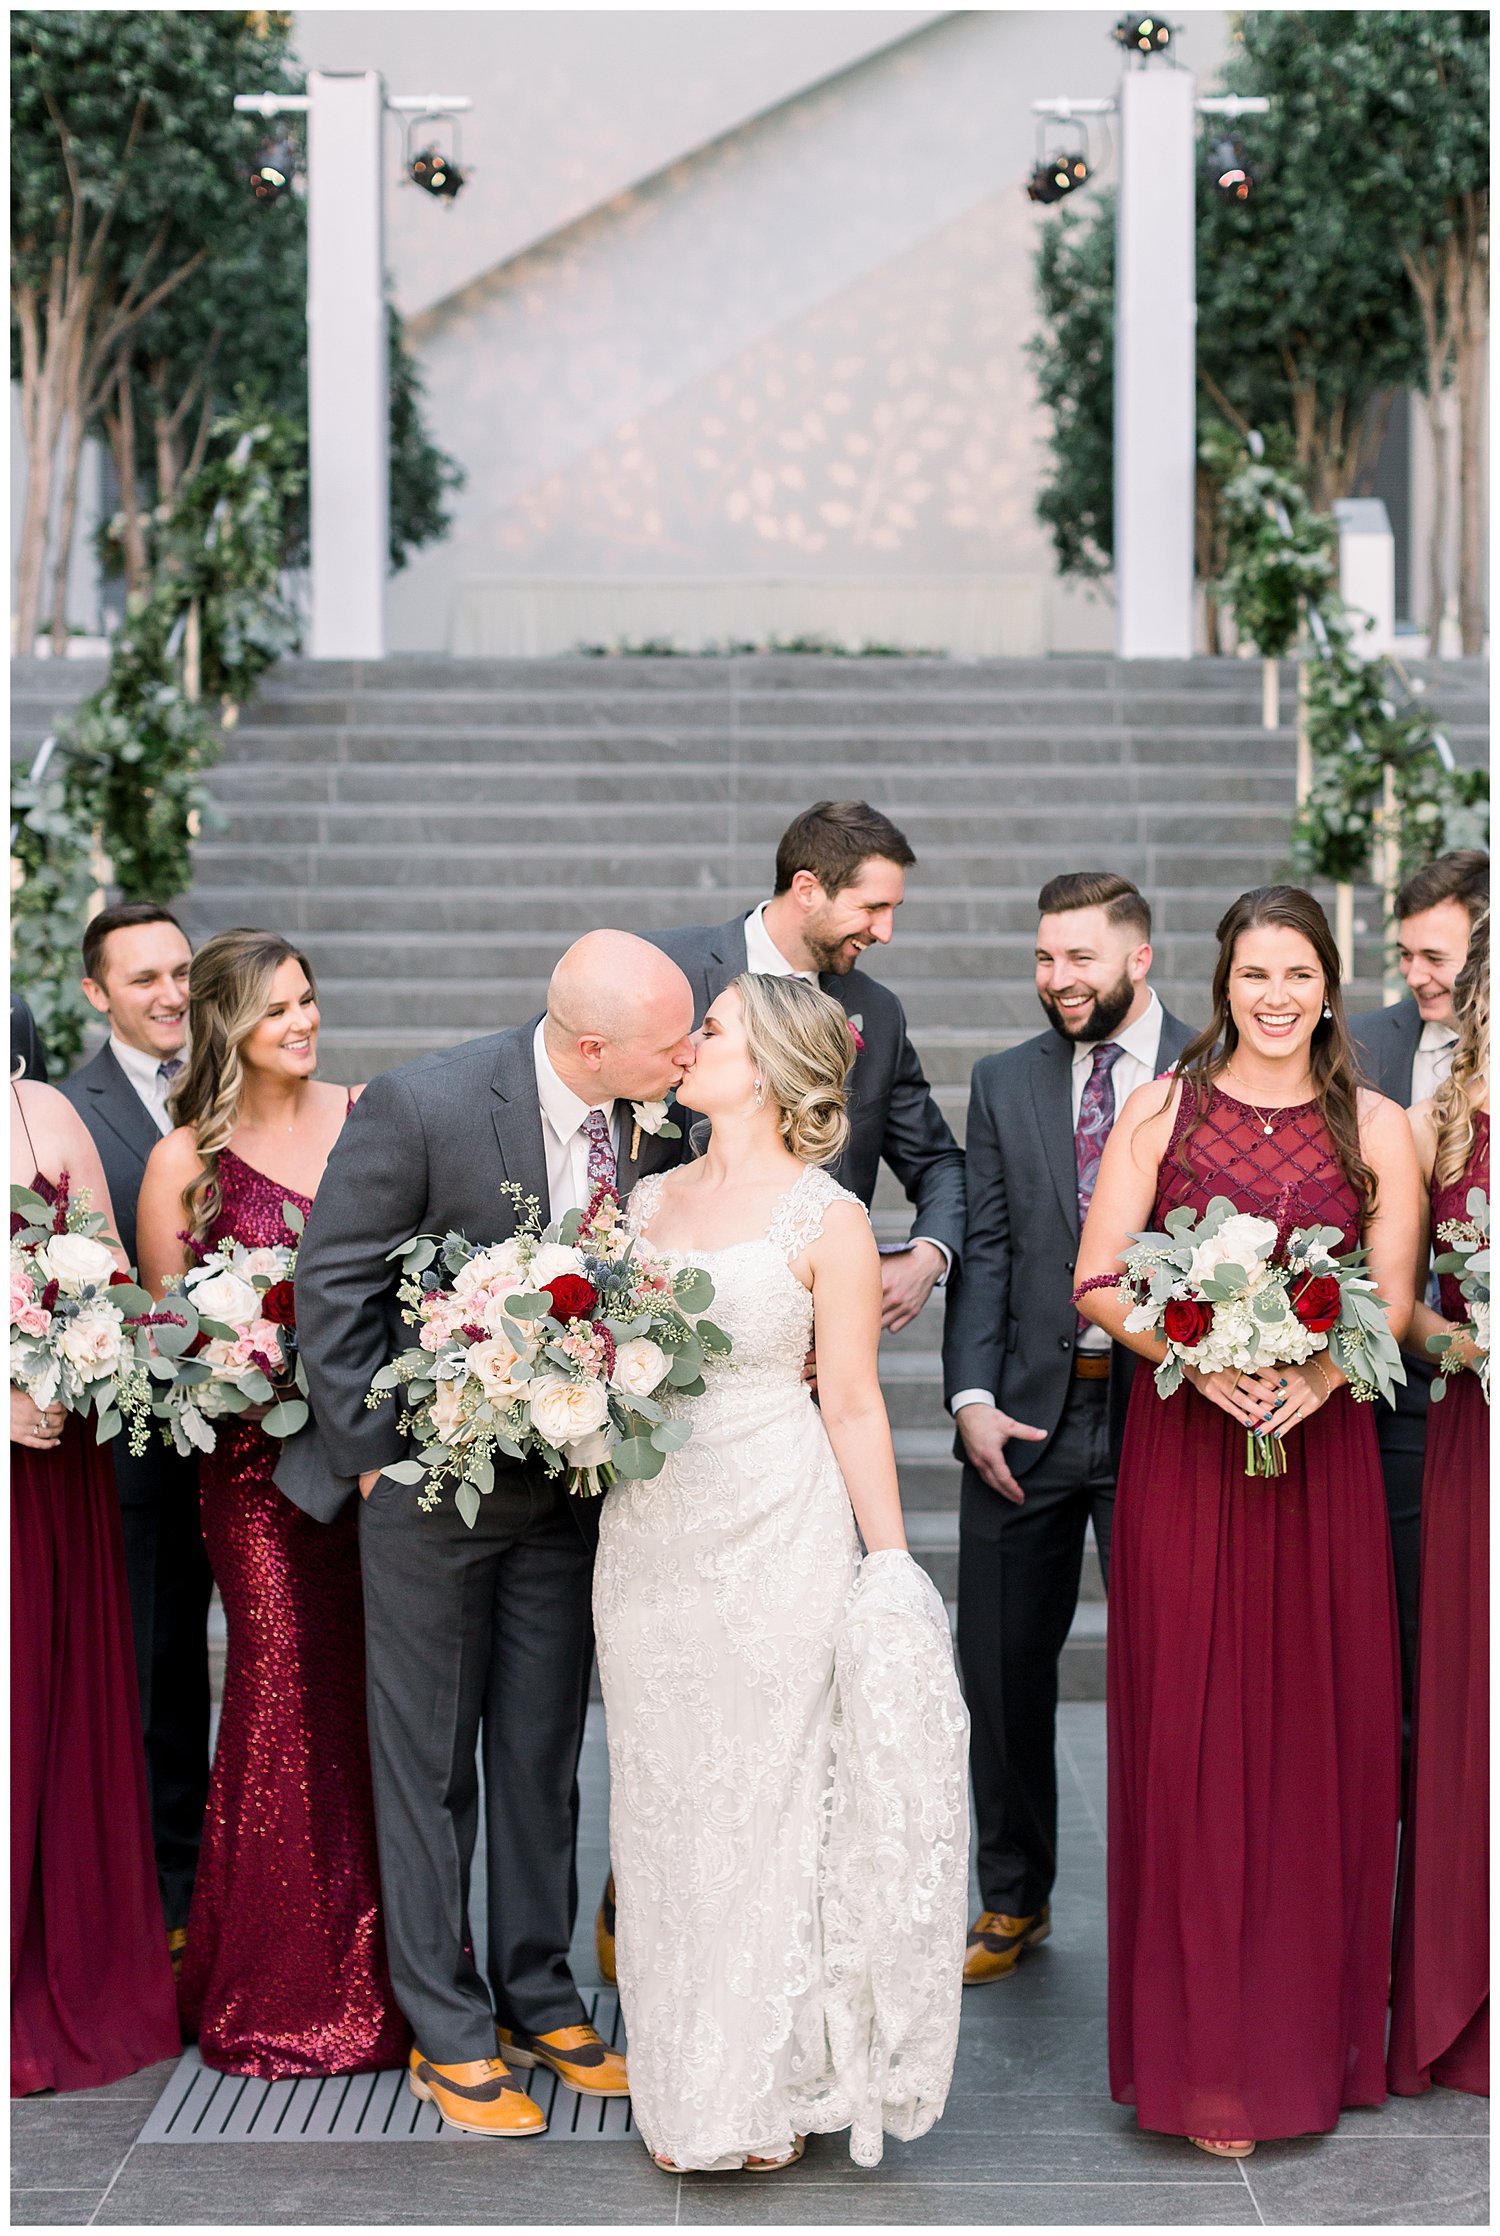 Red and gray wedding party photos for a fall wedding at the Ritz Carlton